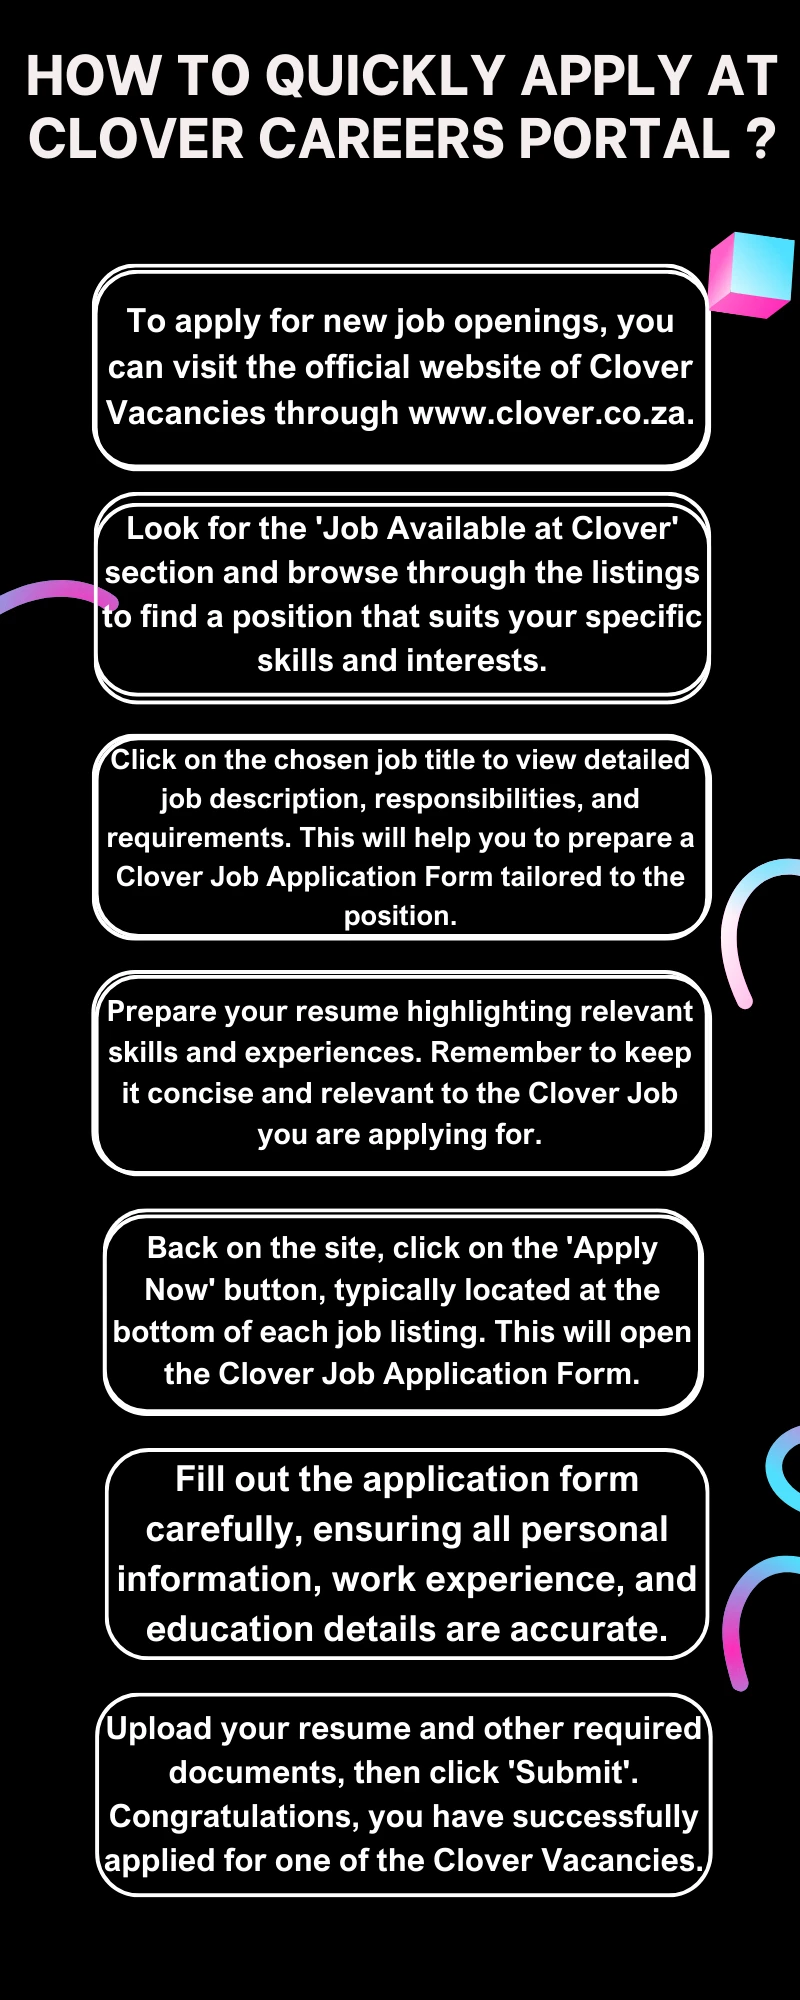 How To Quickly Apply at Clover Careers Portal ?